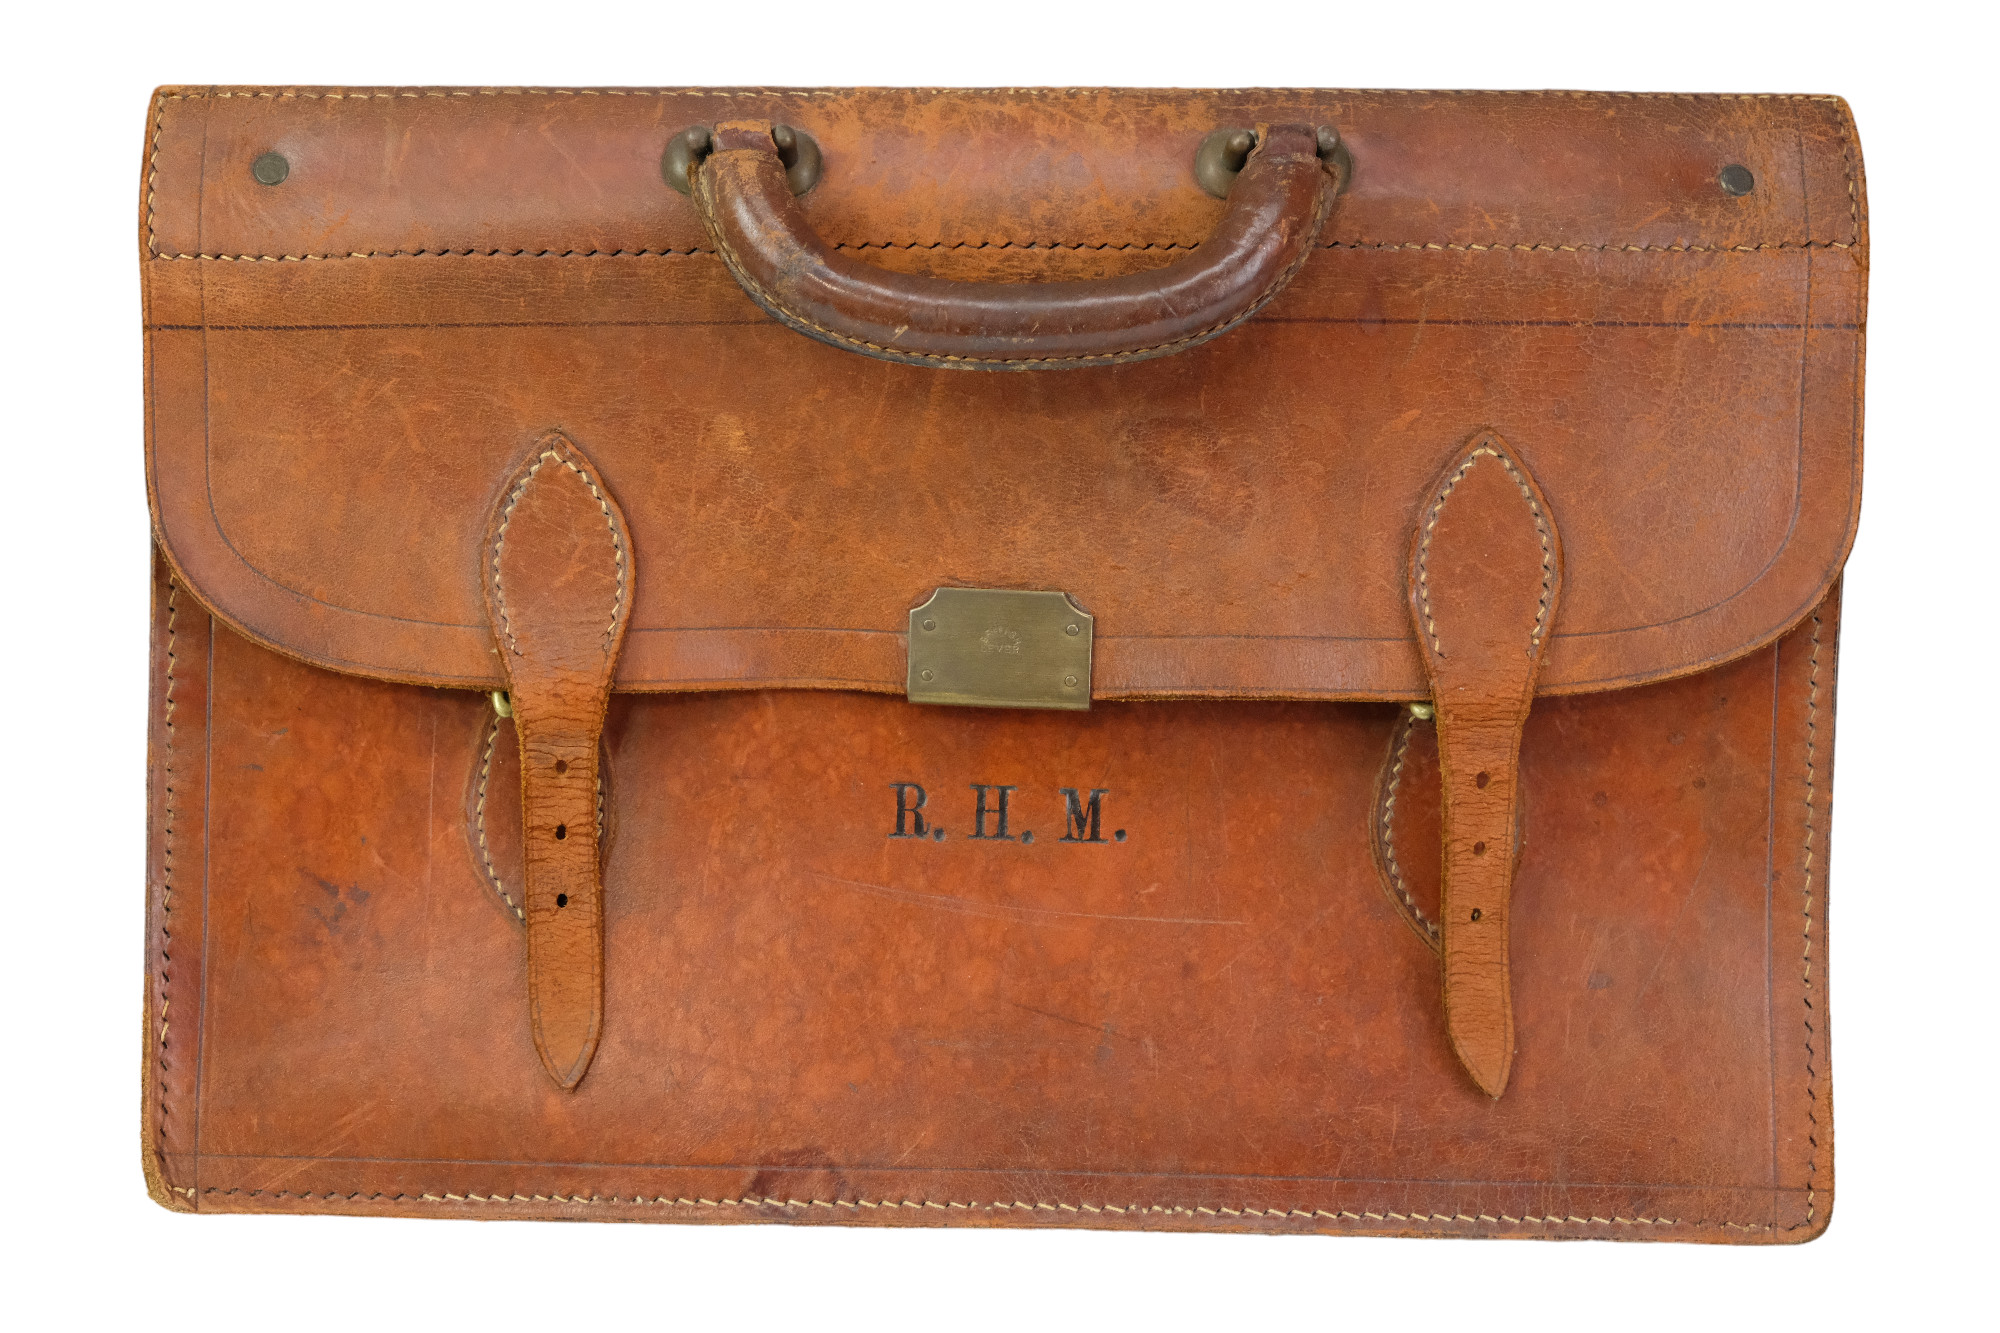 Three vintage leather bags / satchels, early-to-mid 20th Century, largest 43 x 28 x 15 cm - Image 2 of 4